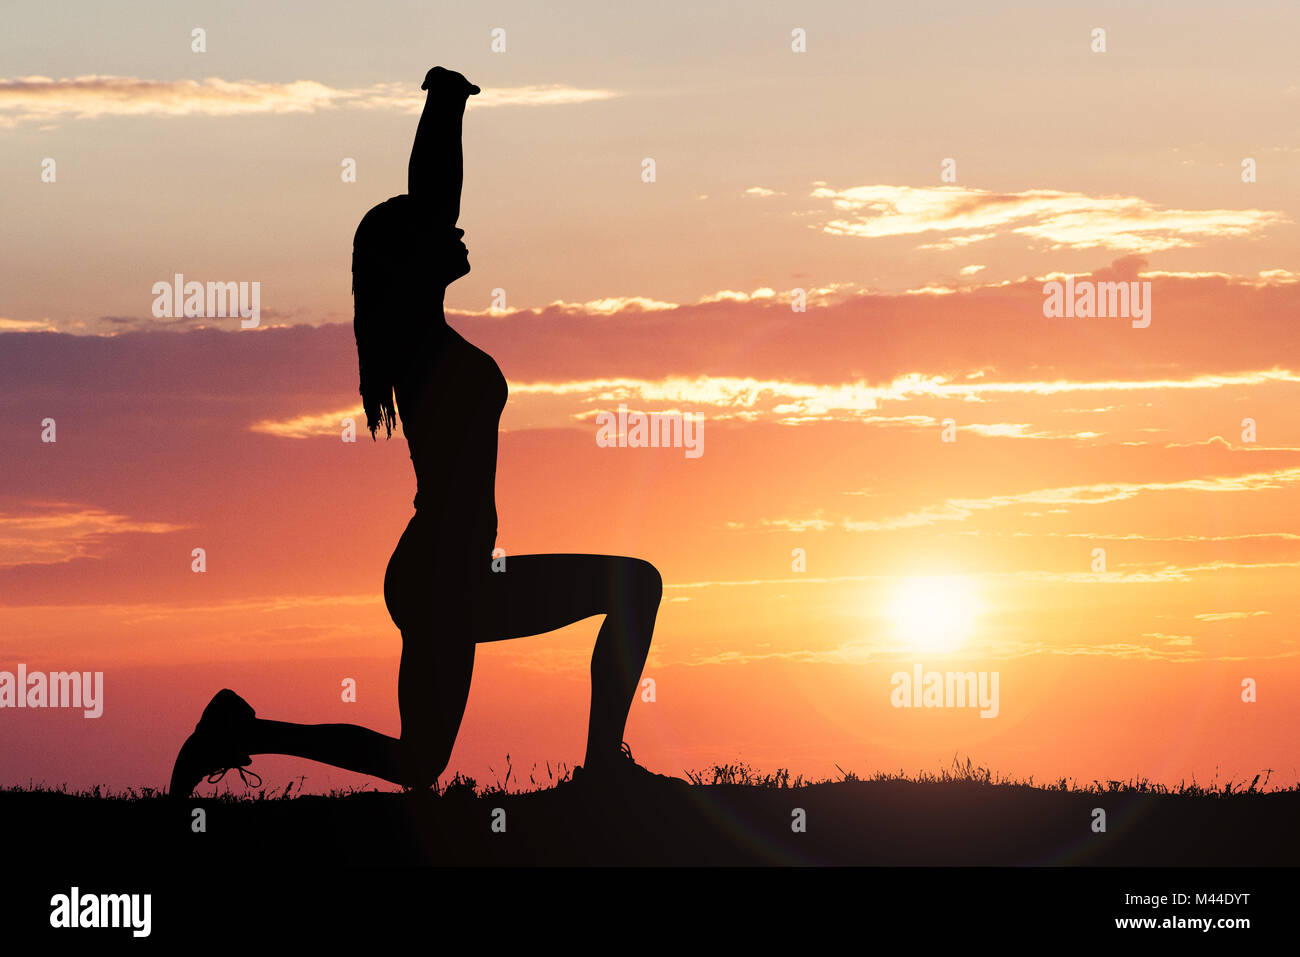 Silhouette Of A Woman Stretching Against Dramatic Sky At Sunset Stock Photo